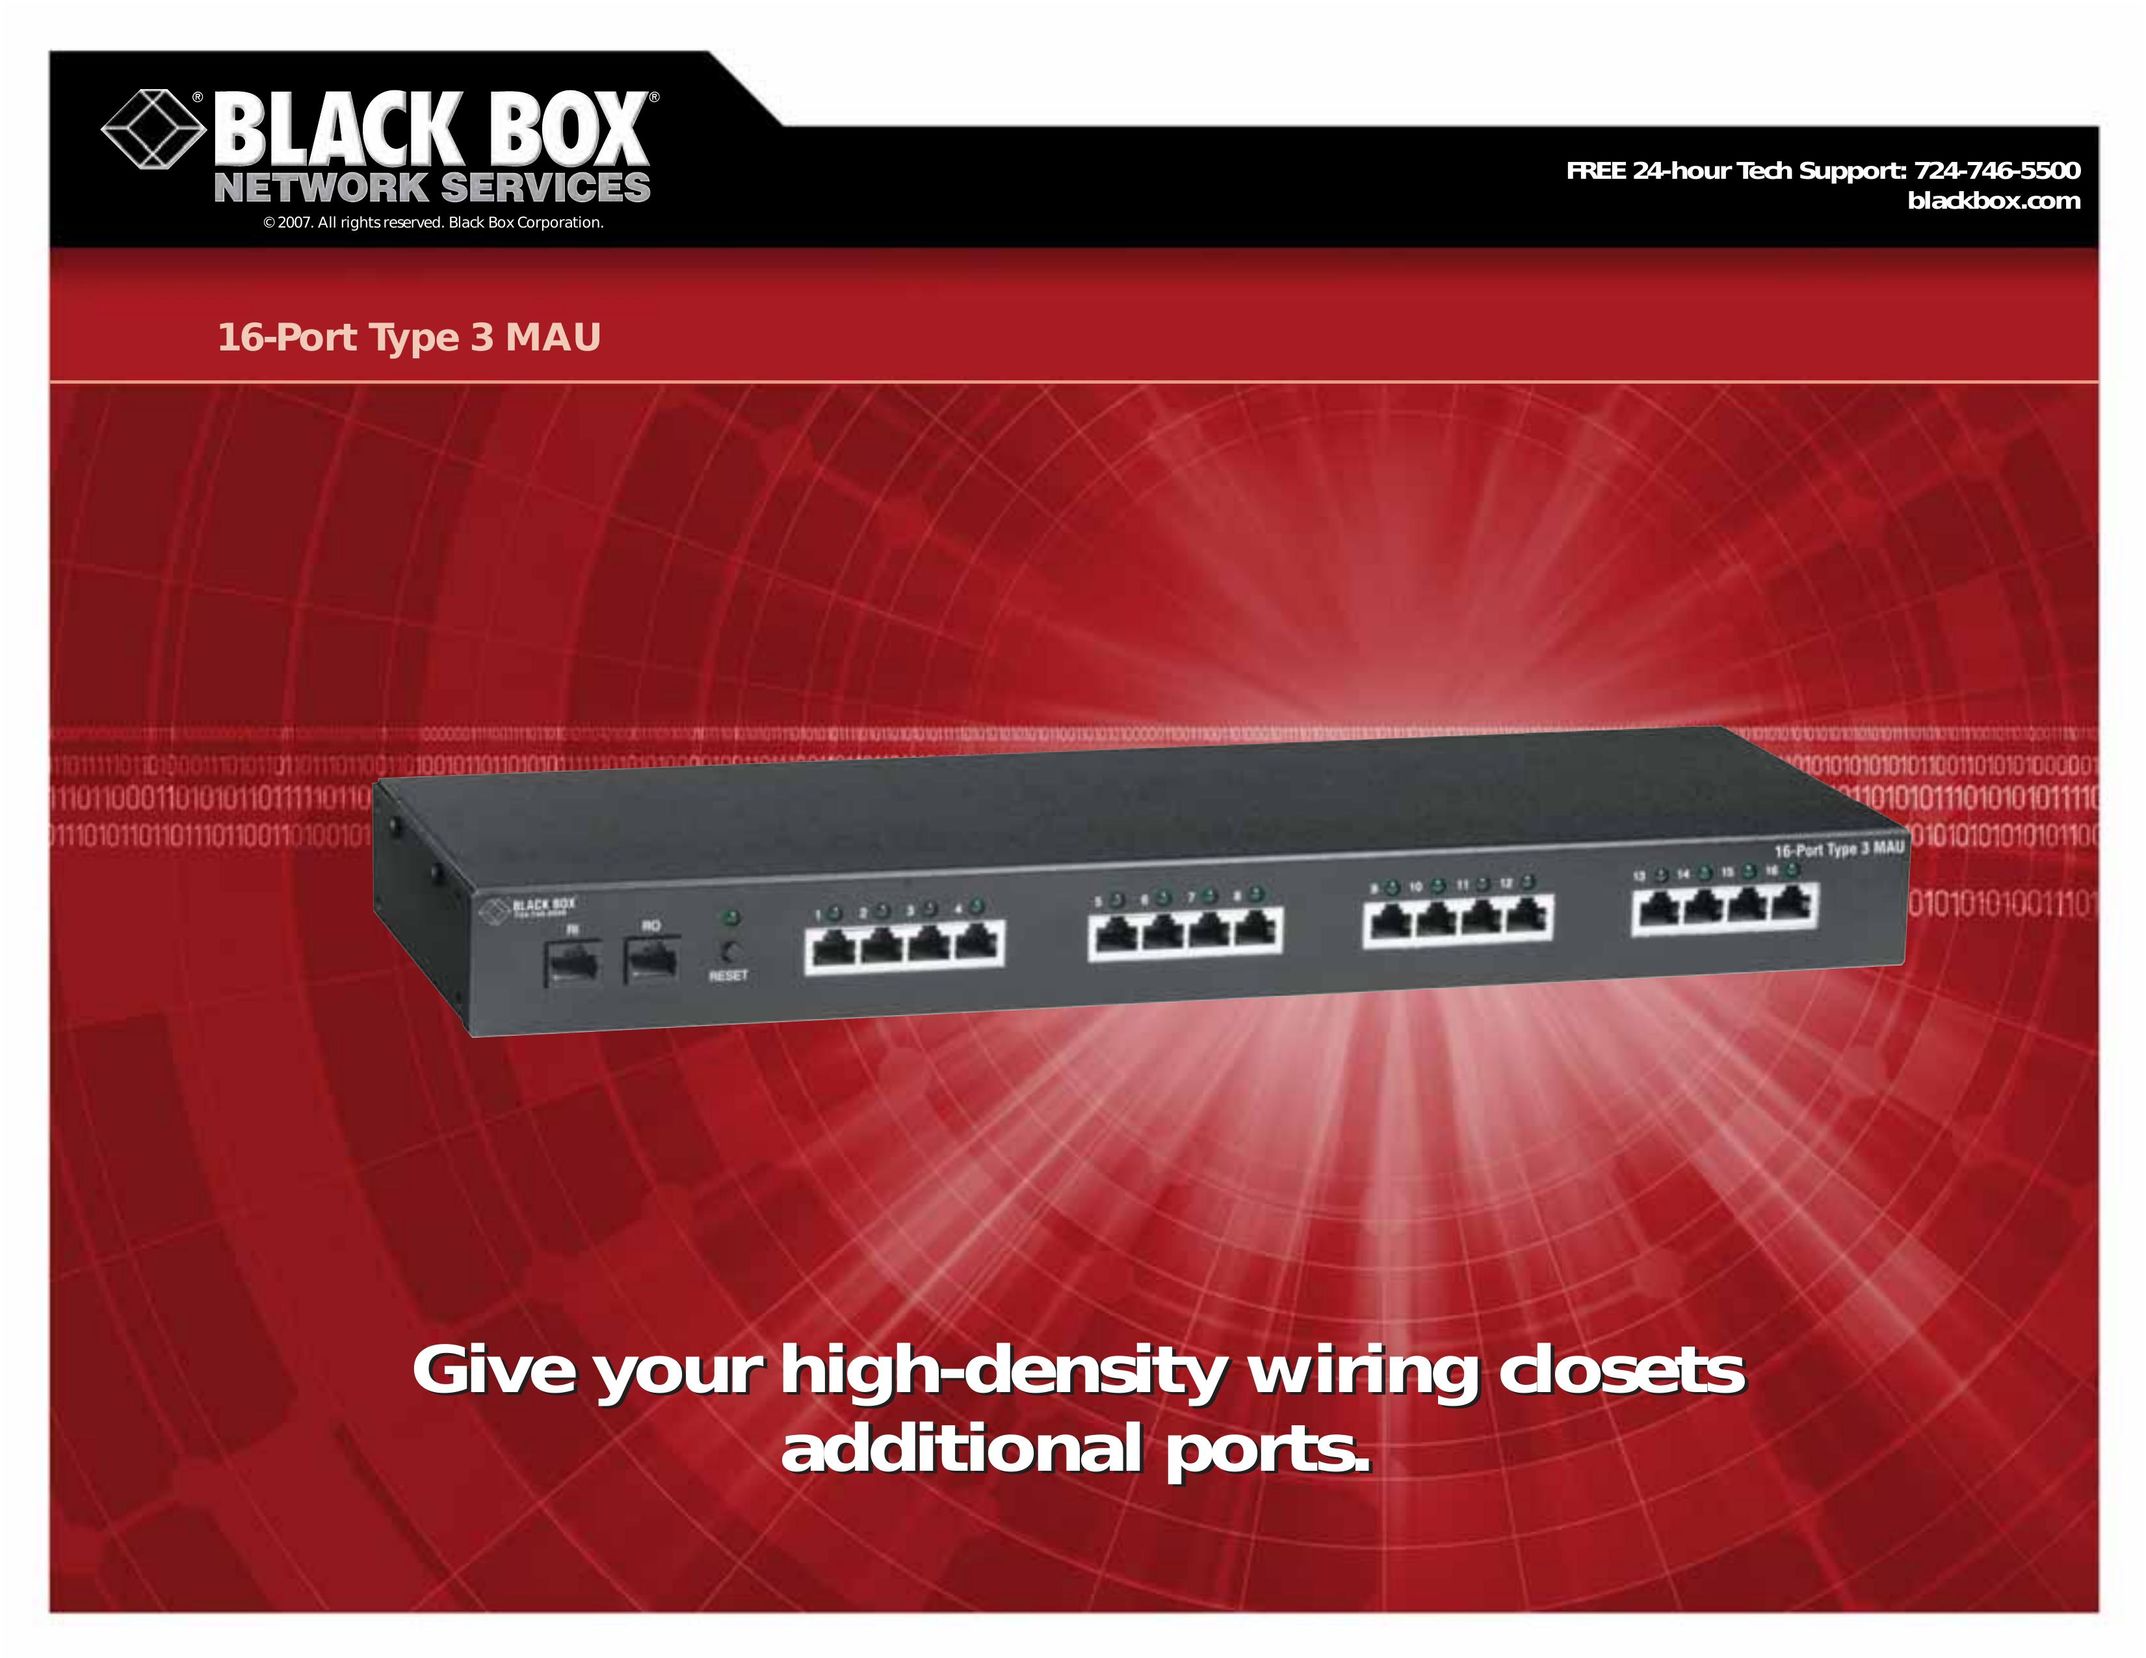 Black Box 16-Port Type 3 MAU Network Router User Manual